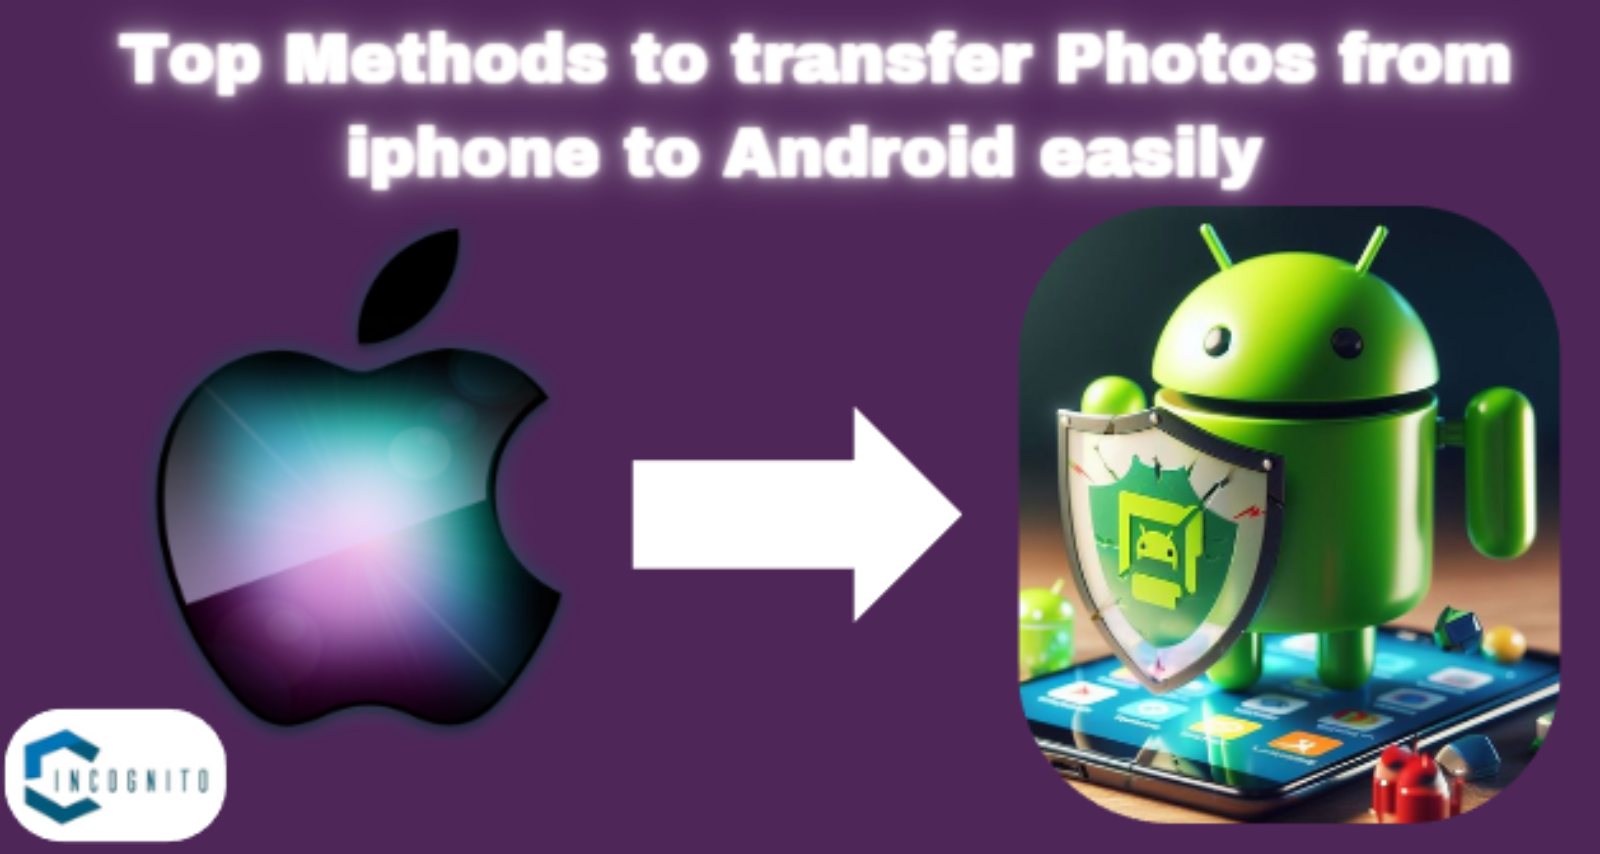 Transfer Photos from iPhone to Android Easily